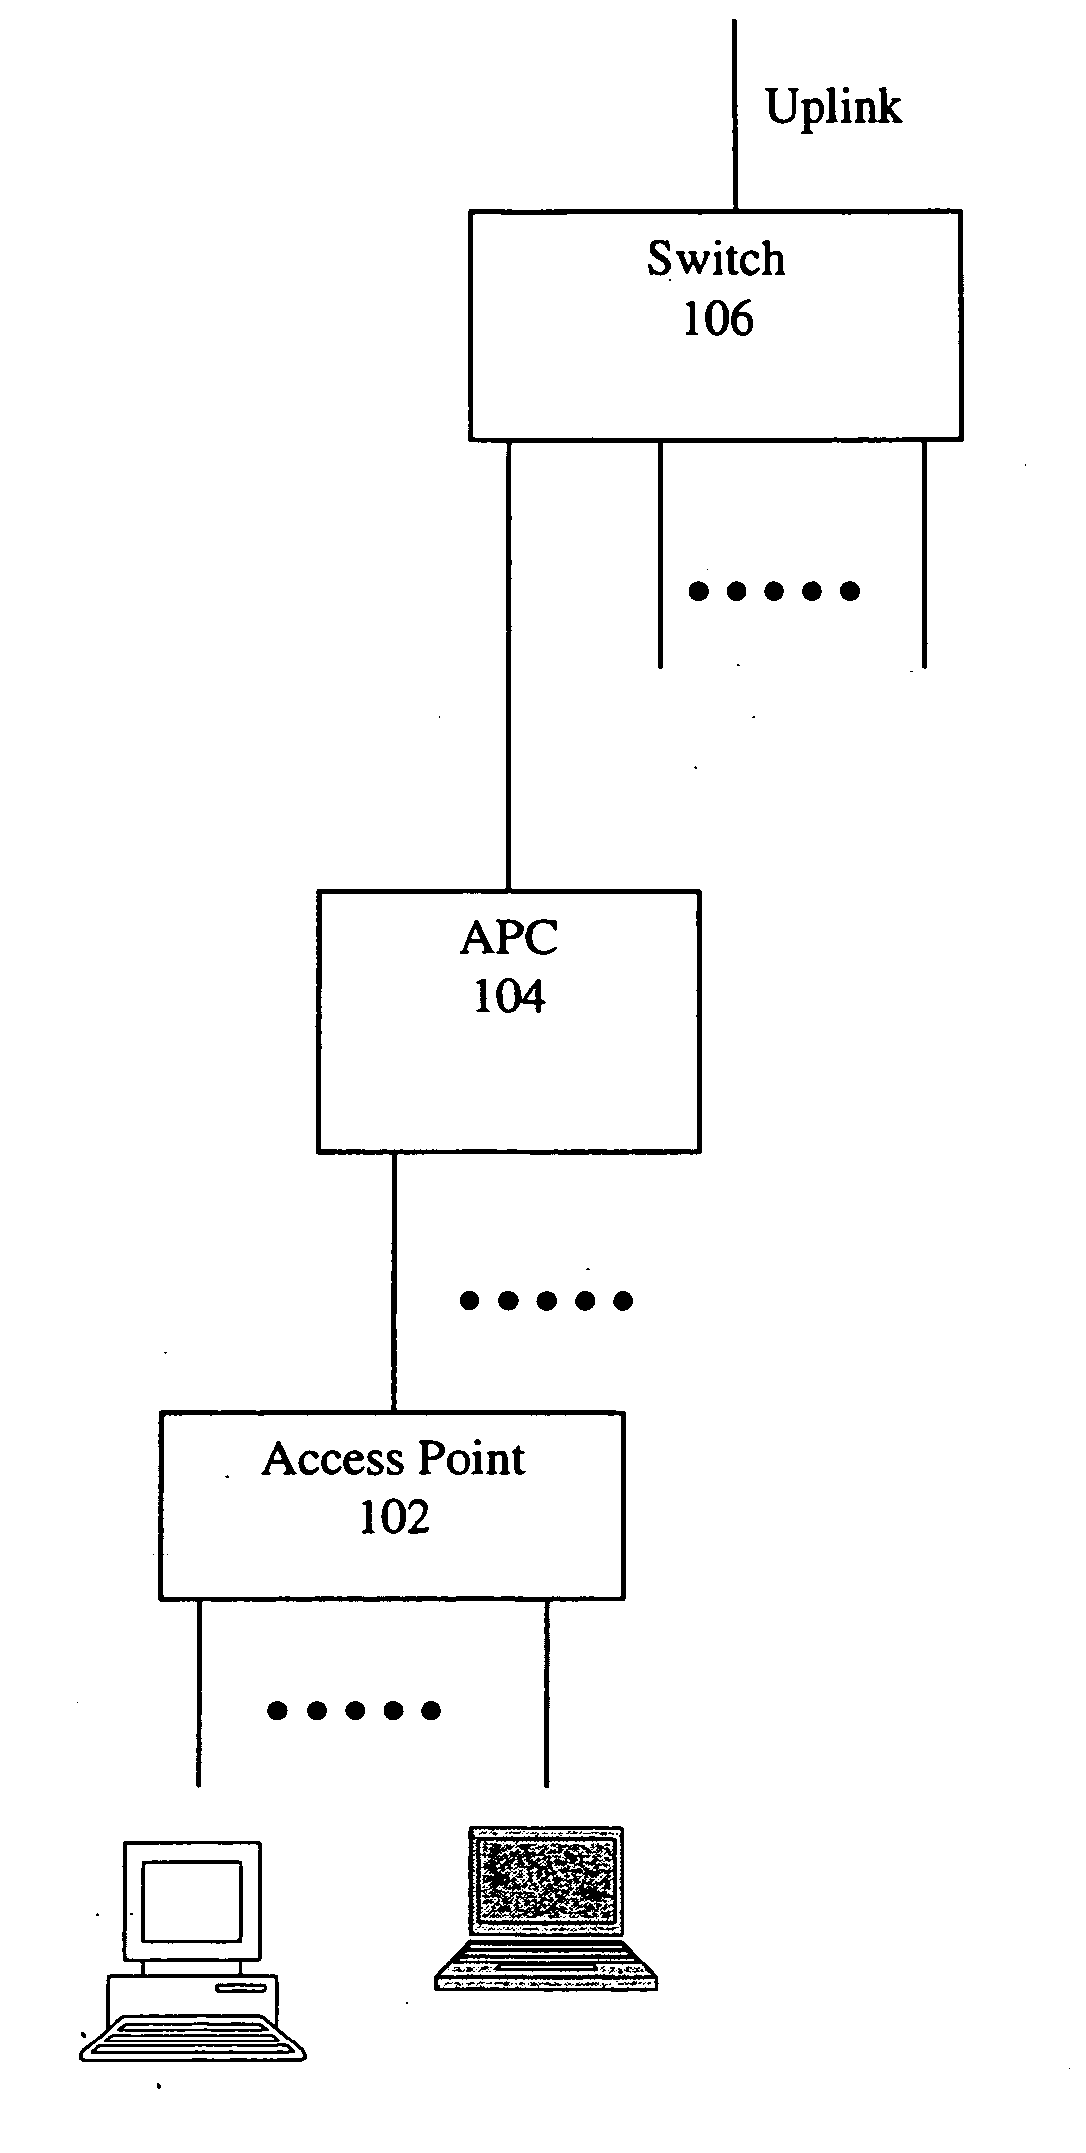 Unified wired and wireless switch architecture